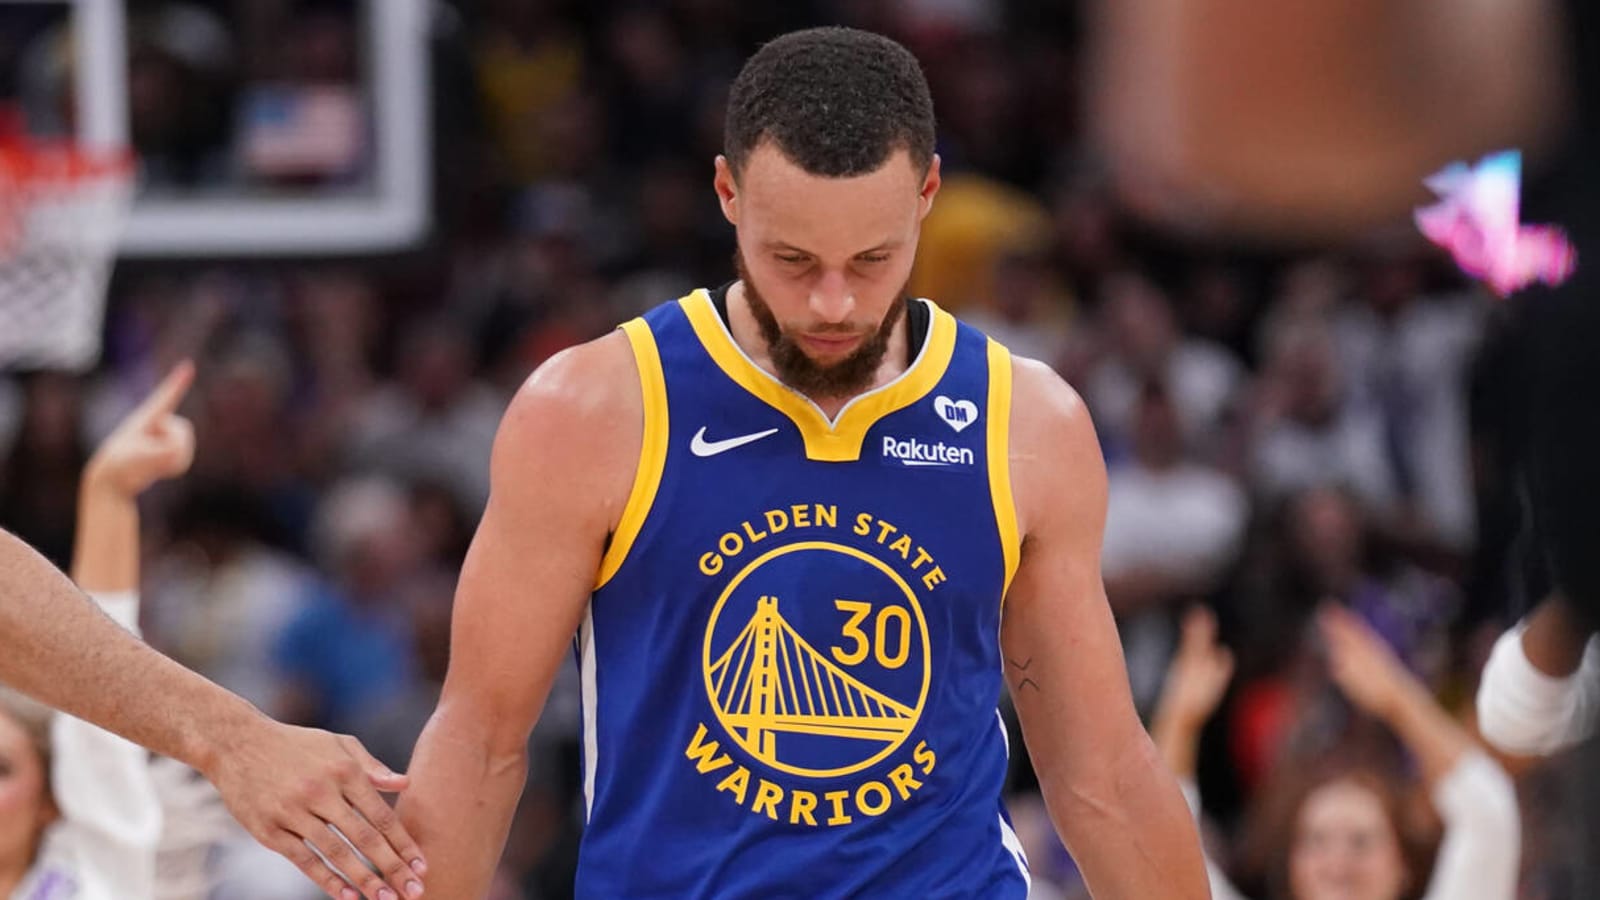 ‘Clutch Player of The Year’ Steph Curry admits to doing ‘little scouting’ amidst NBA playoffs